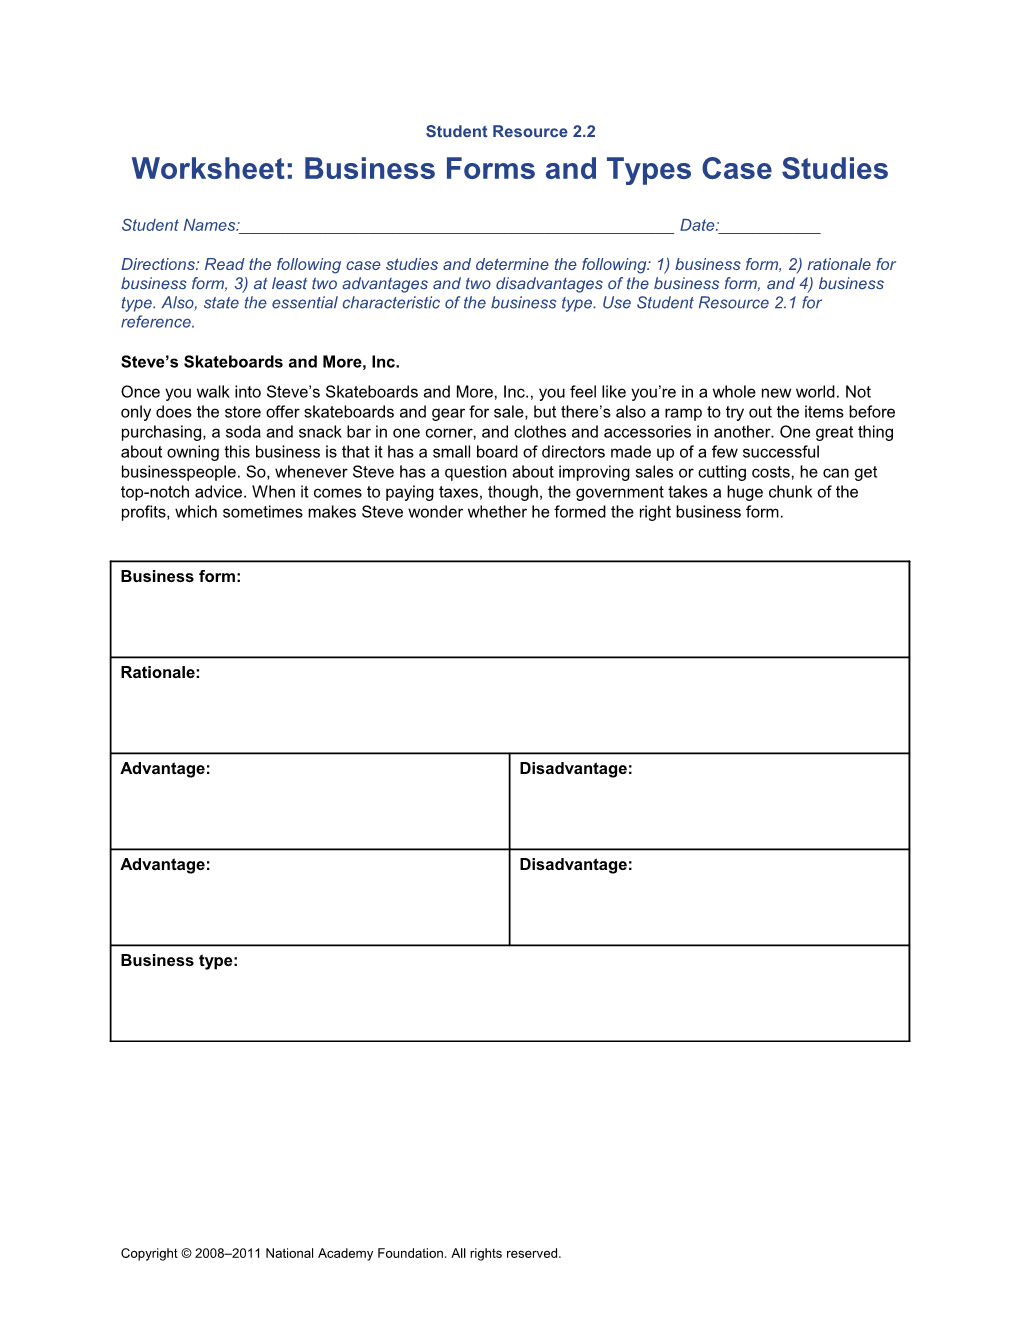 Worksheet: Business Forms and Types Case Studies